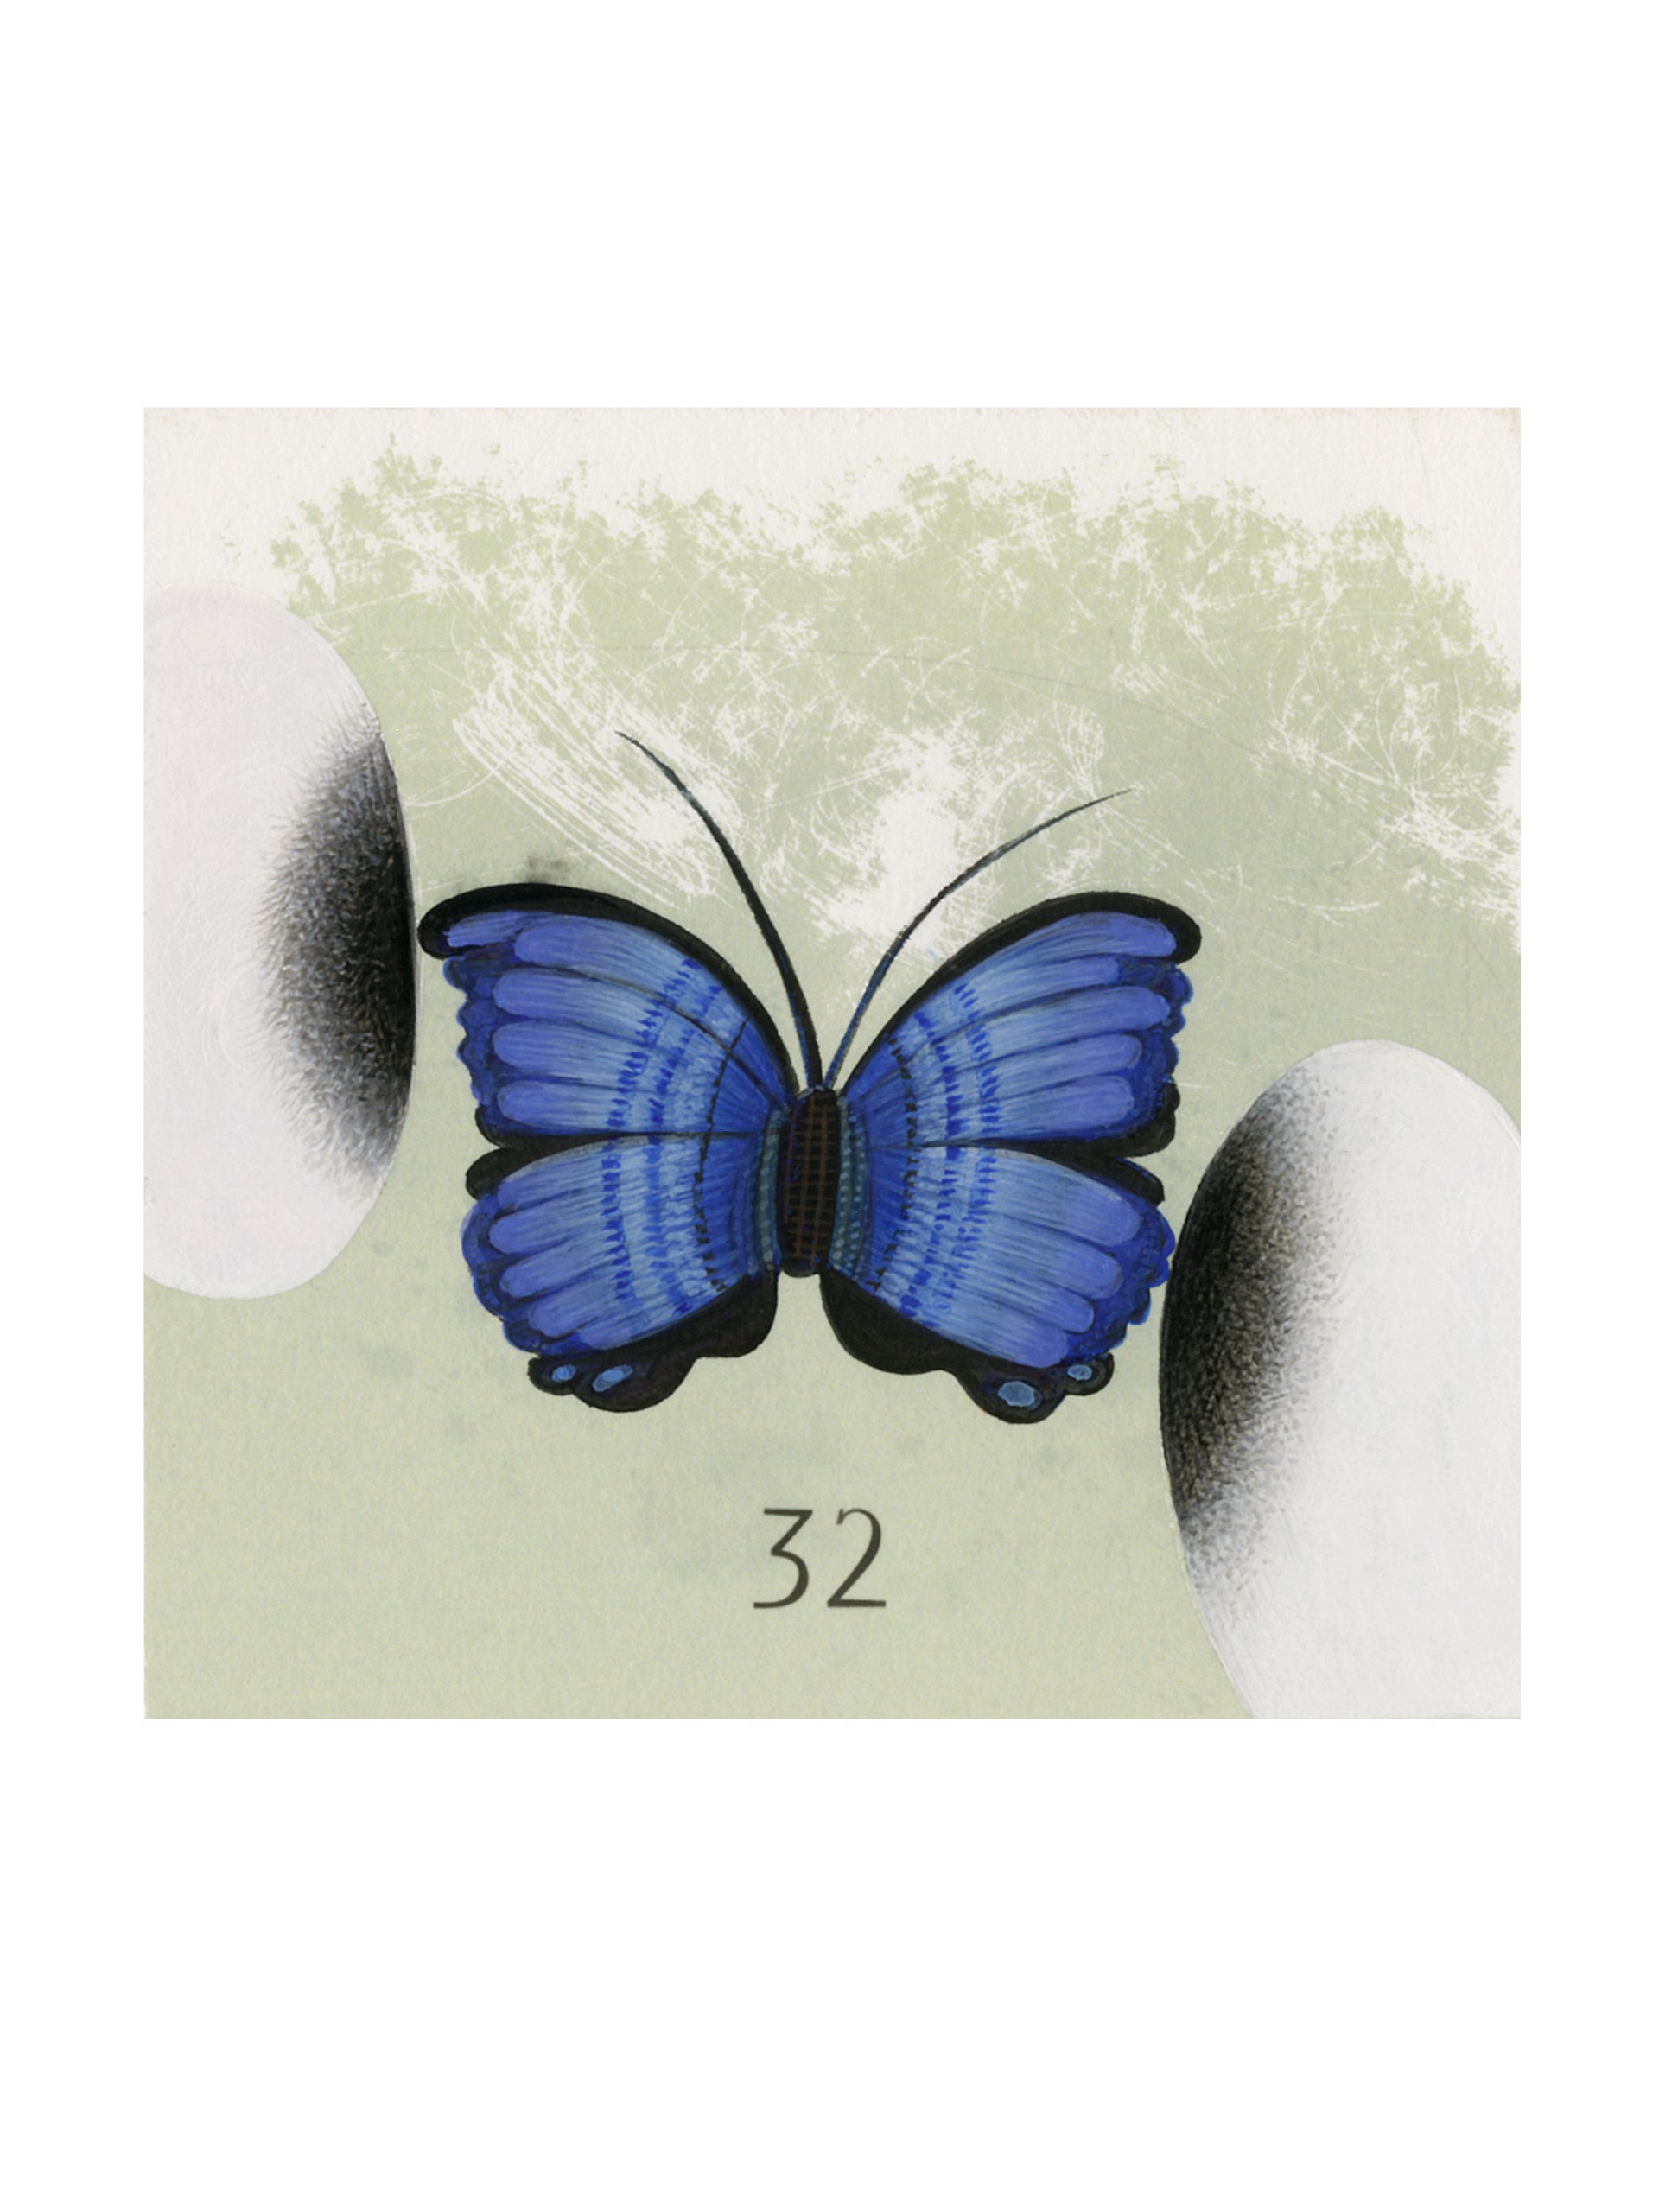 Small Morpho by Anne Smith